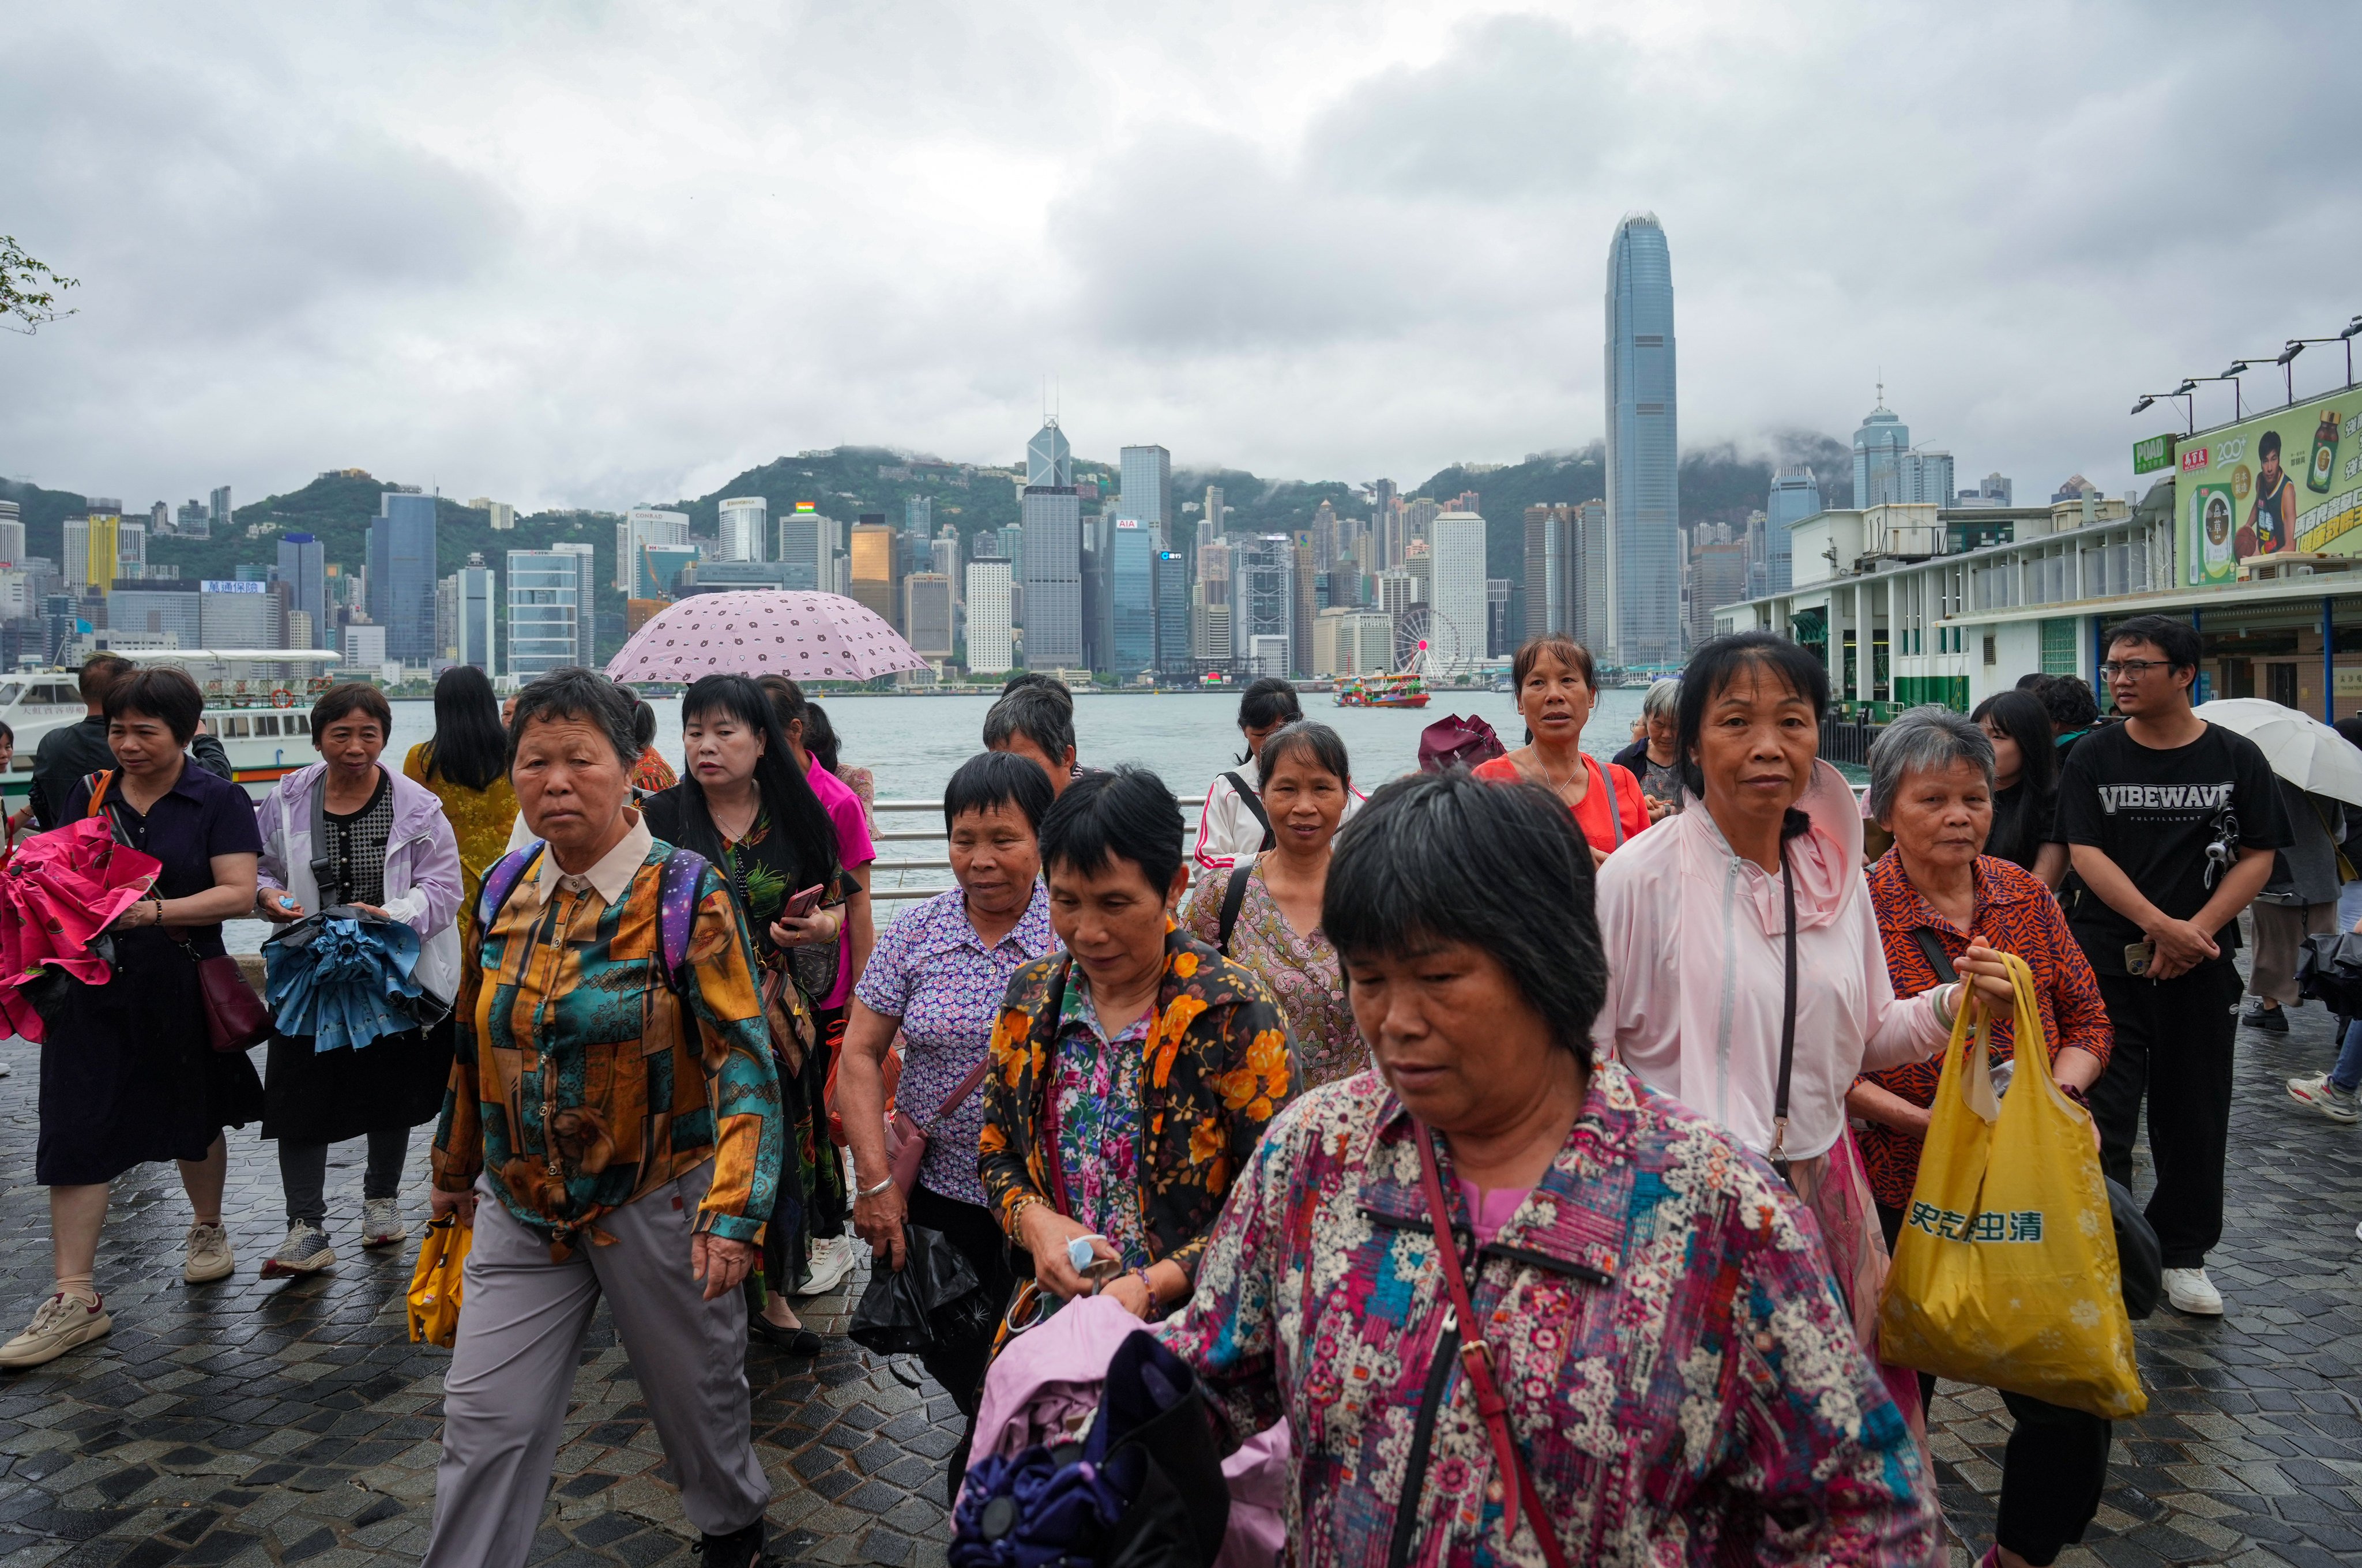 Hong Kong is expected to welcome at least 800,000 mainland Chinese visitors over the Labour Day “golden week” holiday. Photo: Sam Tsang